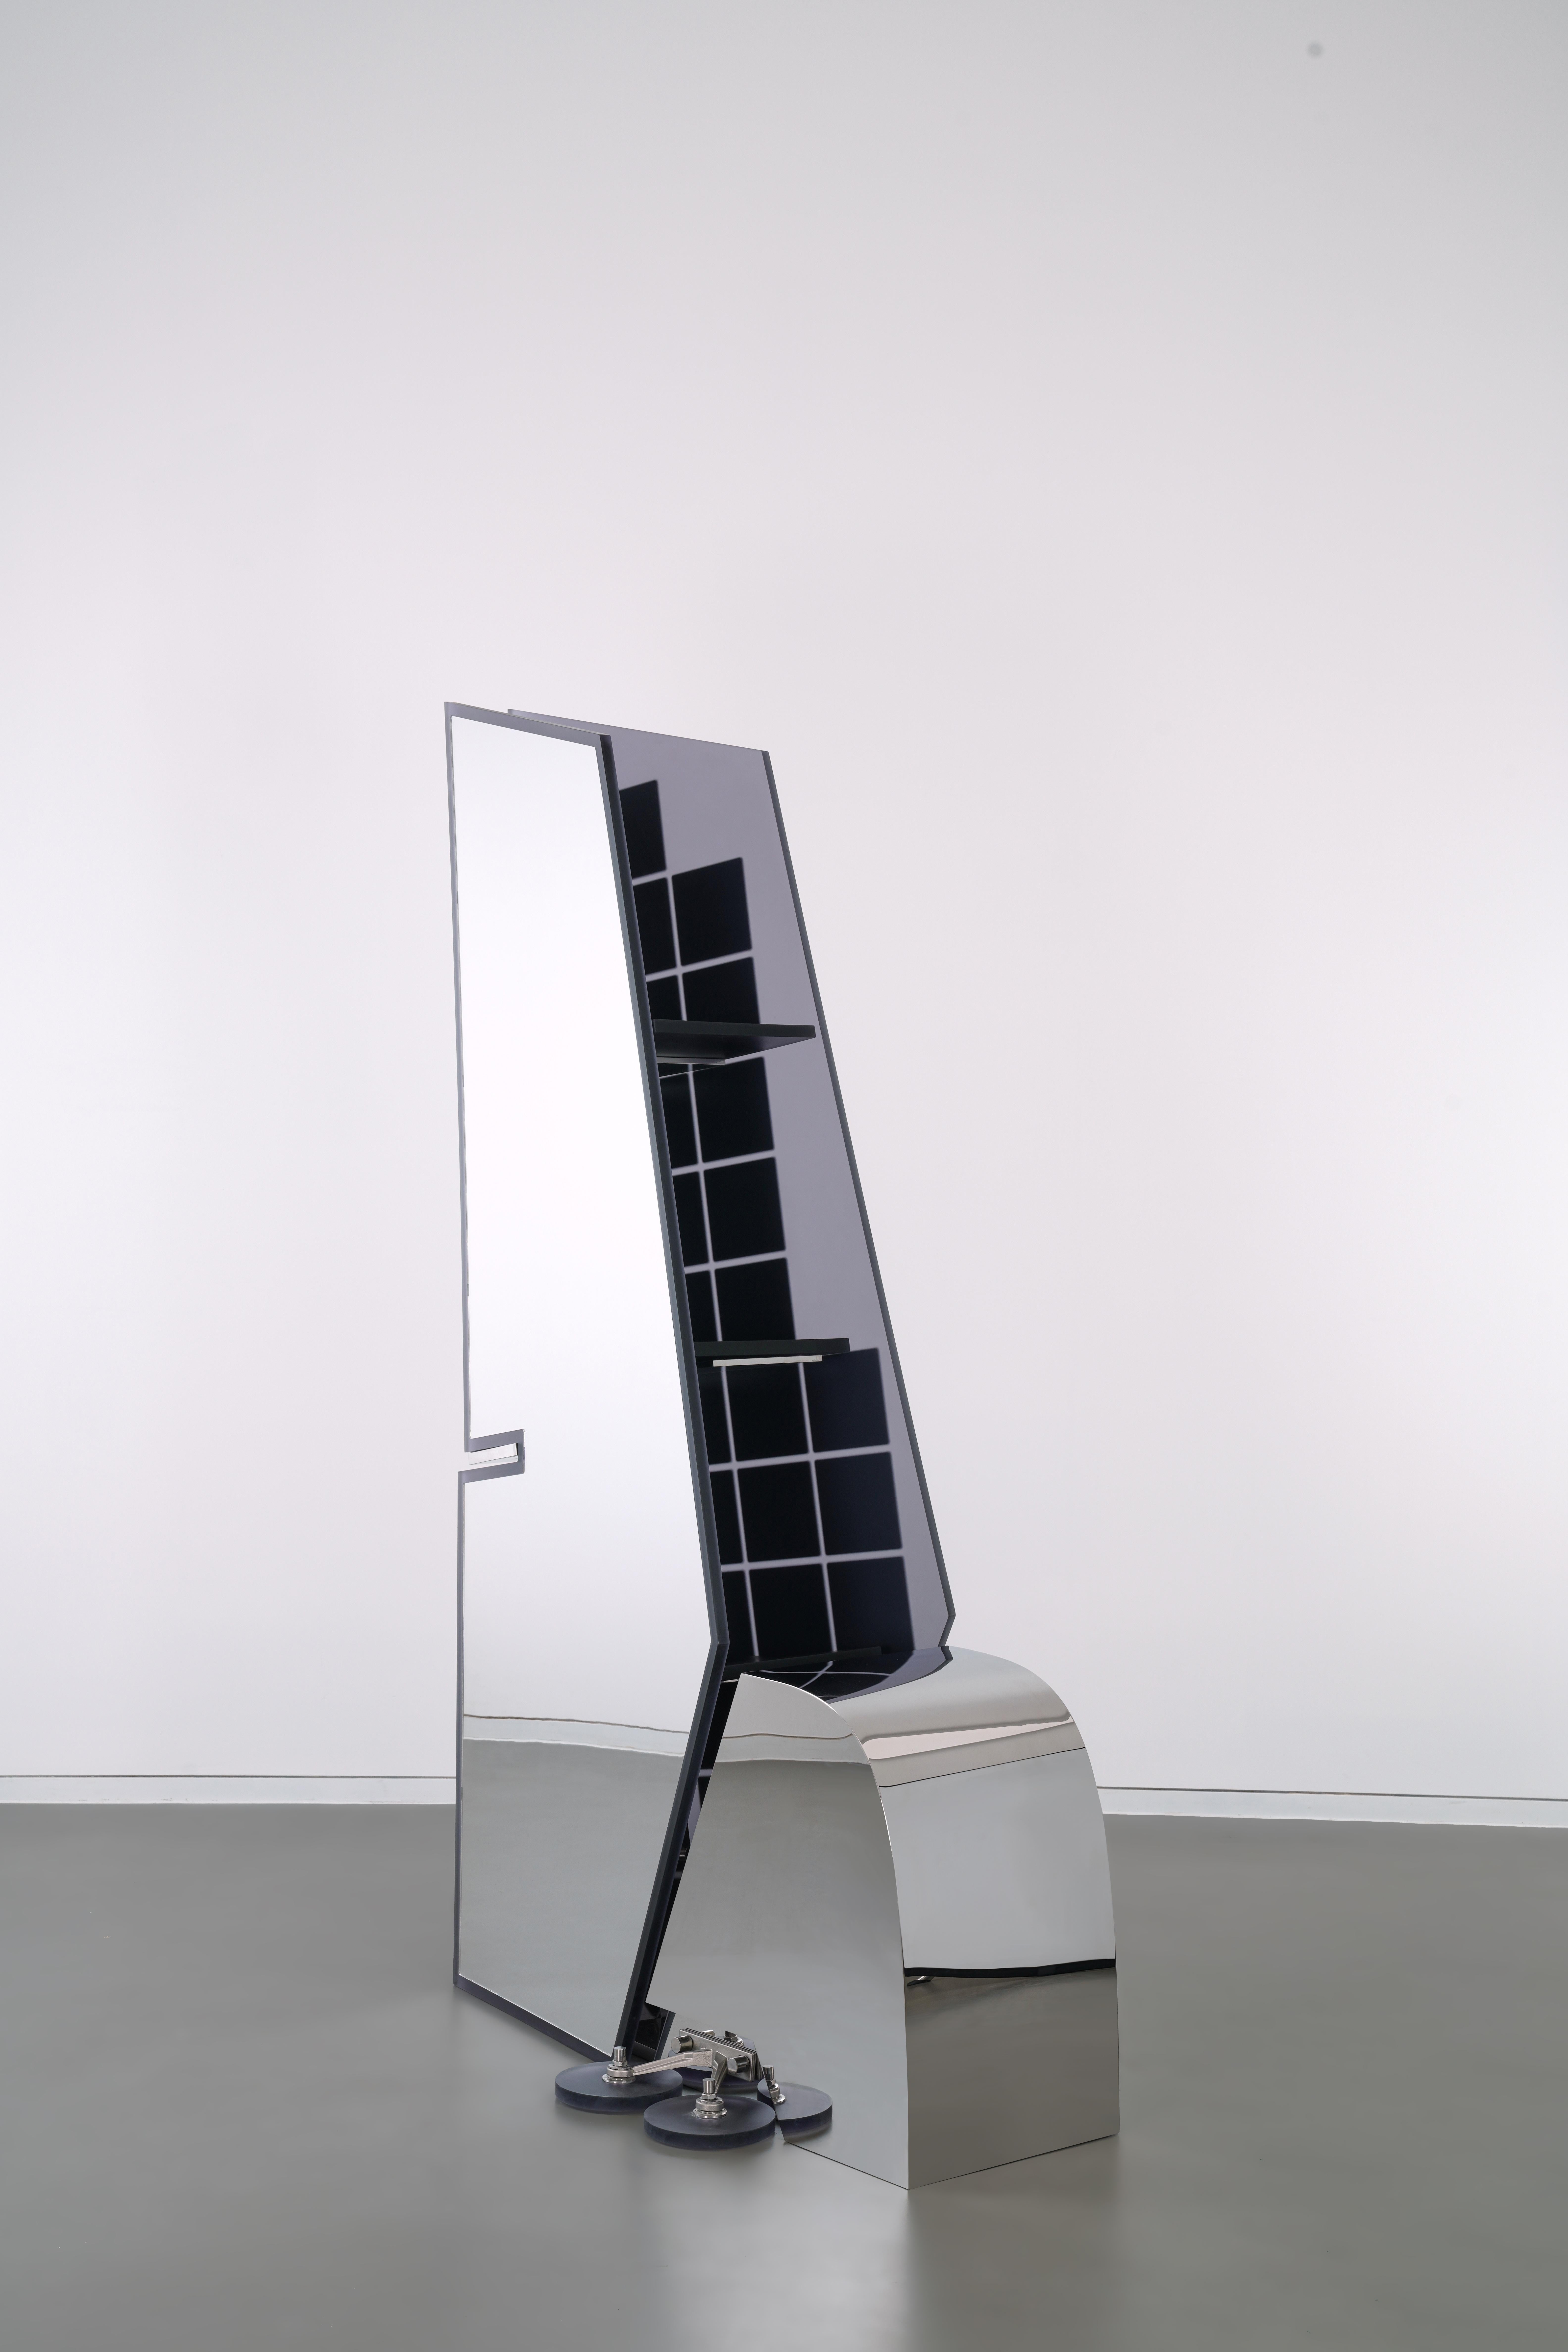 Reality Reflection features an abstract representation of the tail fin of an airplane, with a small square mirror in the form of a heat shield on one side and a full mirror on the other. The thermal insulation tiles were invented to protect the